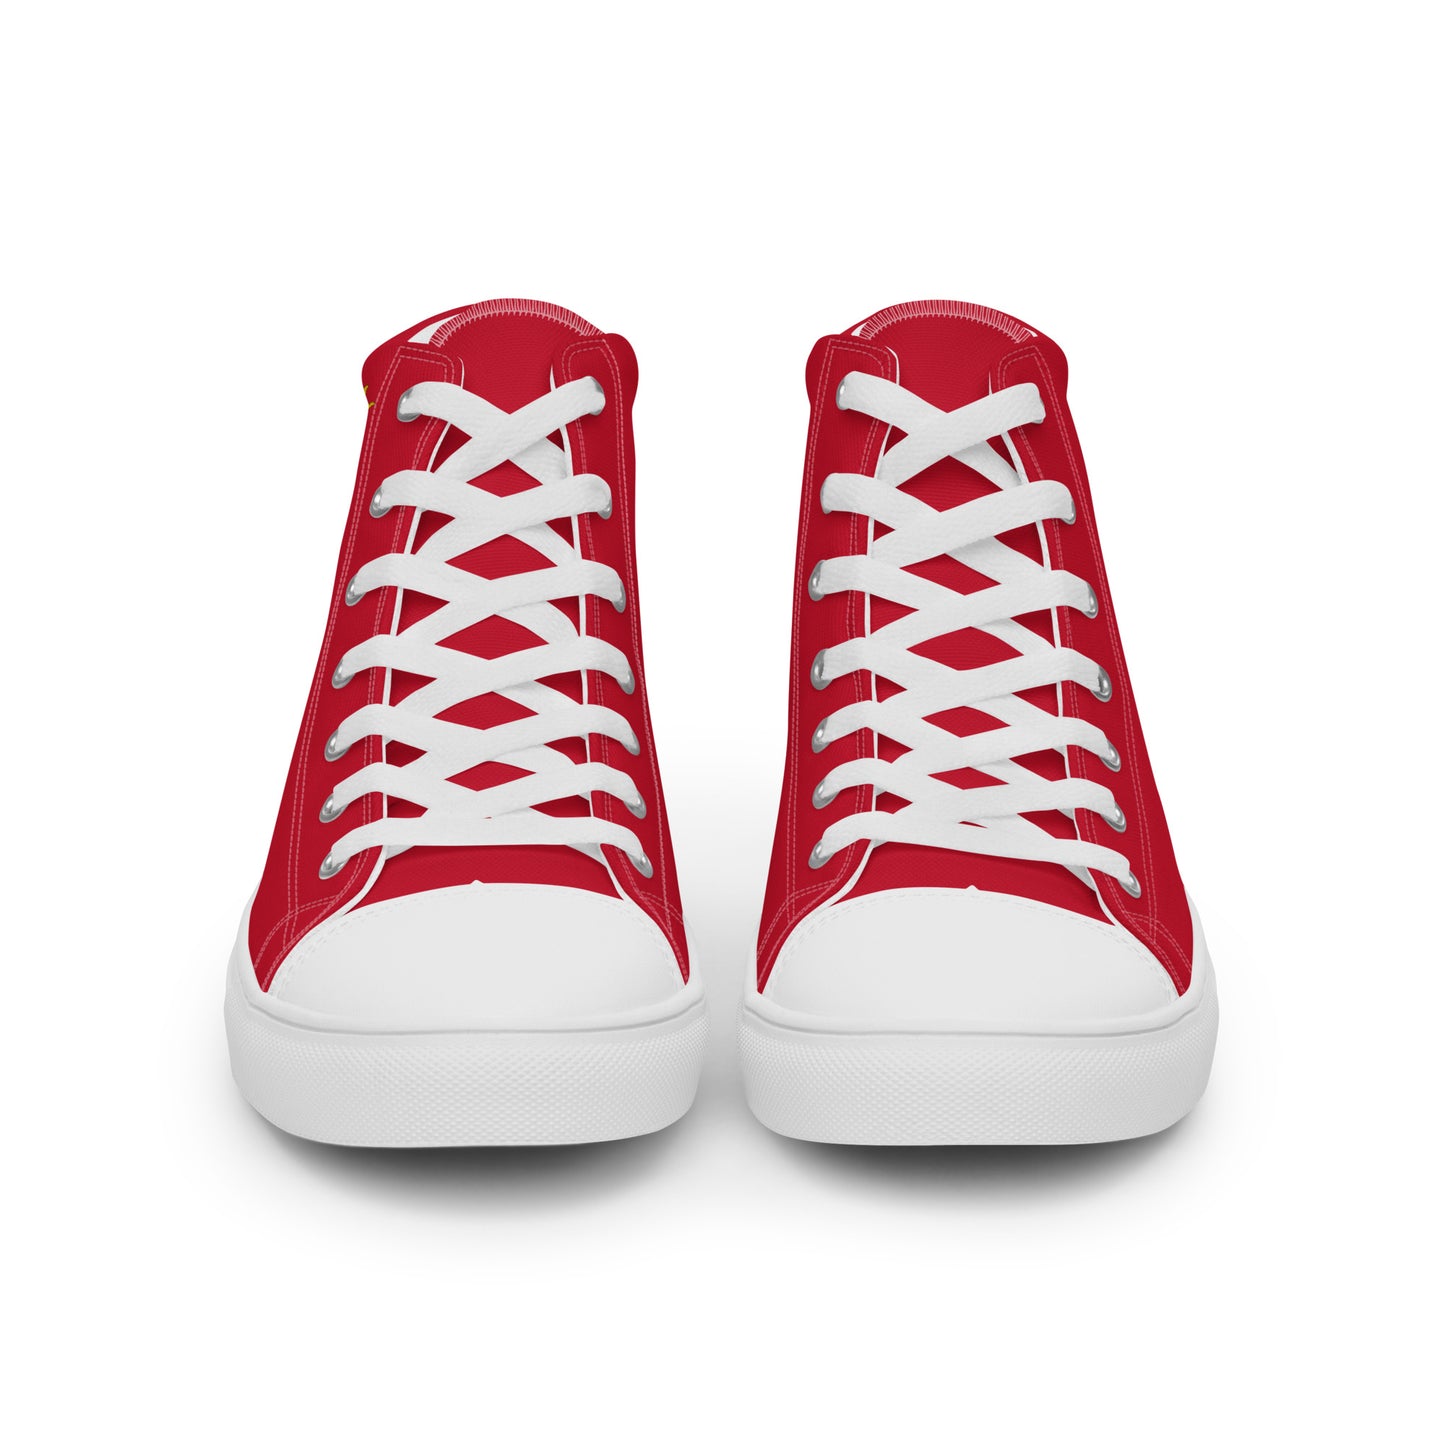 Puerto Rico - Men - Red - High top shoes